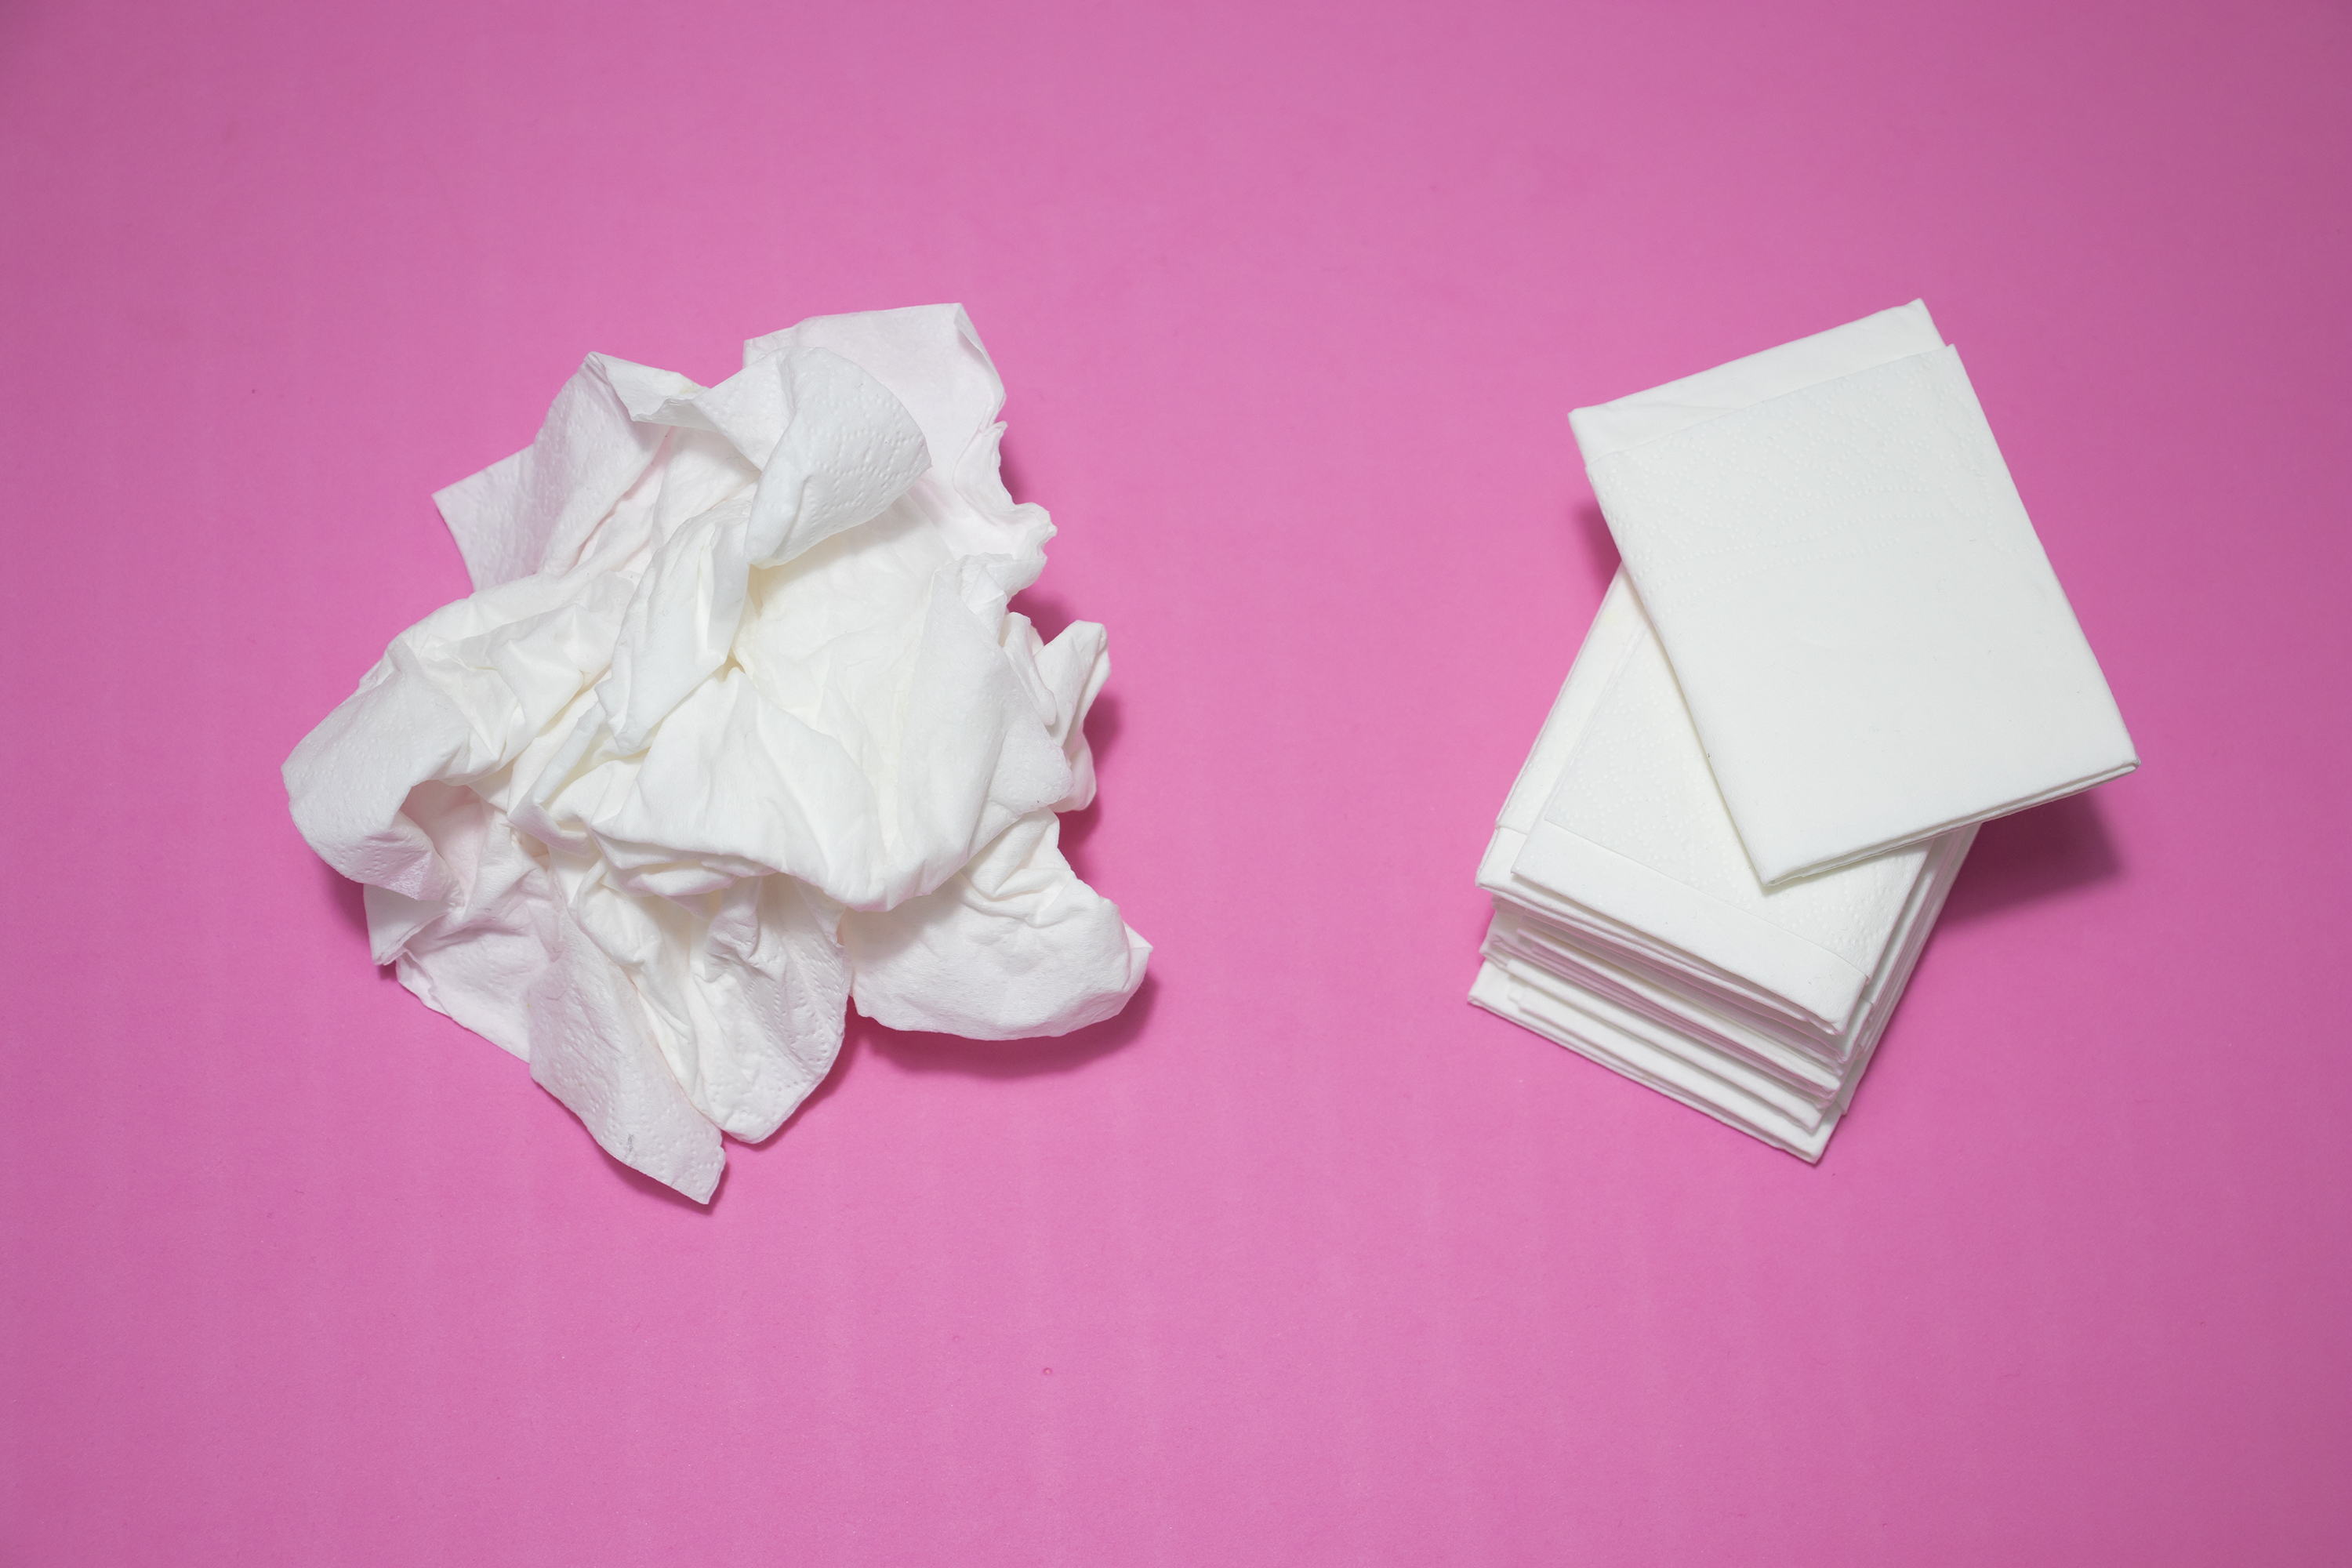 A pile of used tissues next to a new pack on a pink surface